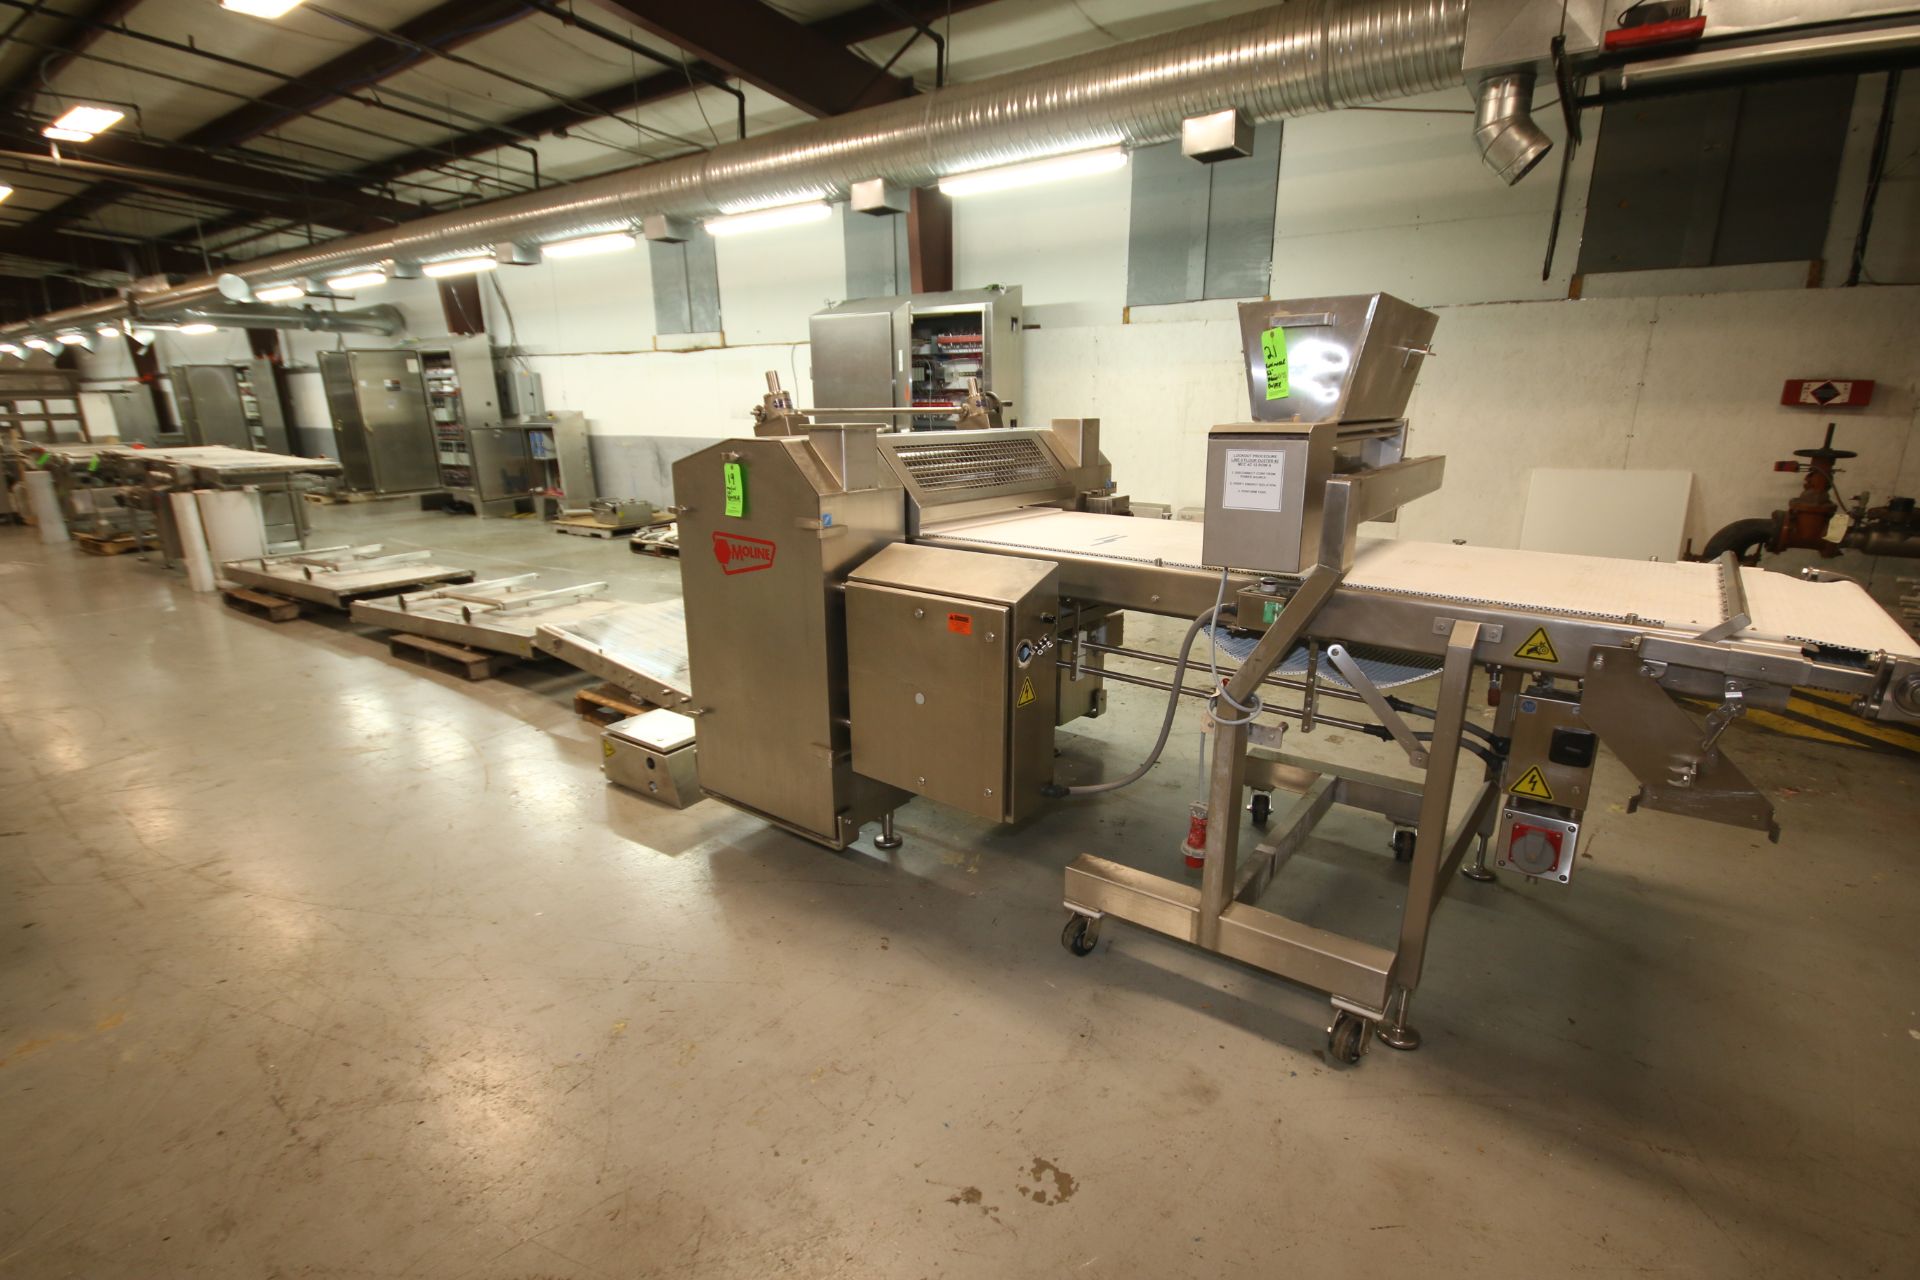 Bulk Bid of Moline 32" Sheeter with Outfeed Conveyor & Rademaker Flour Duster - Includes Lots 19